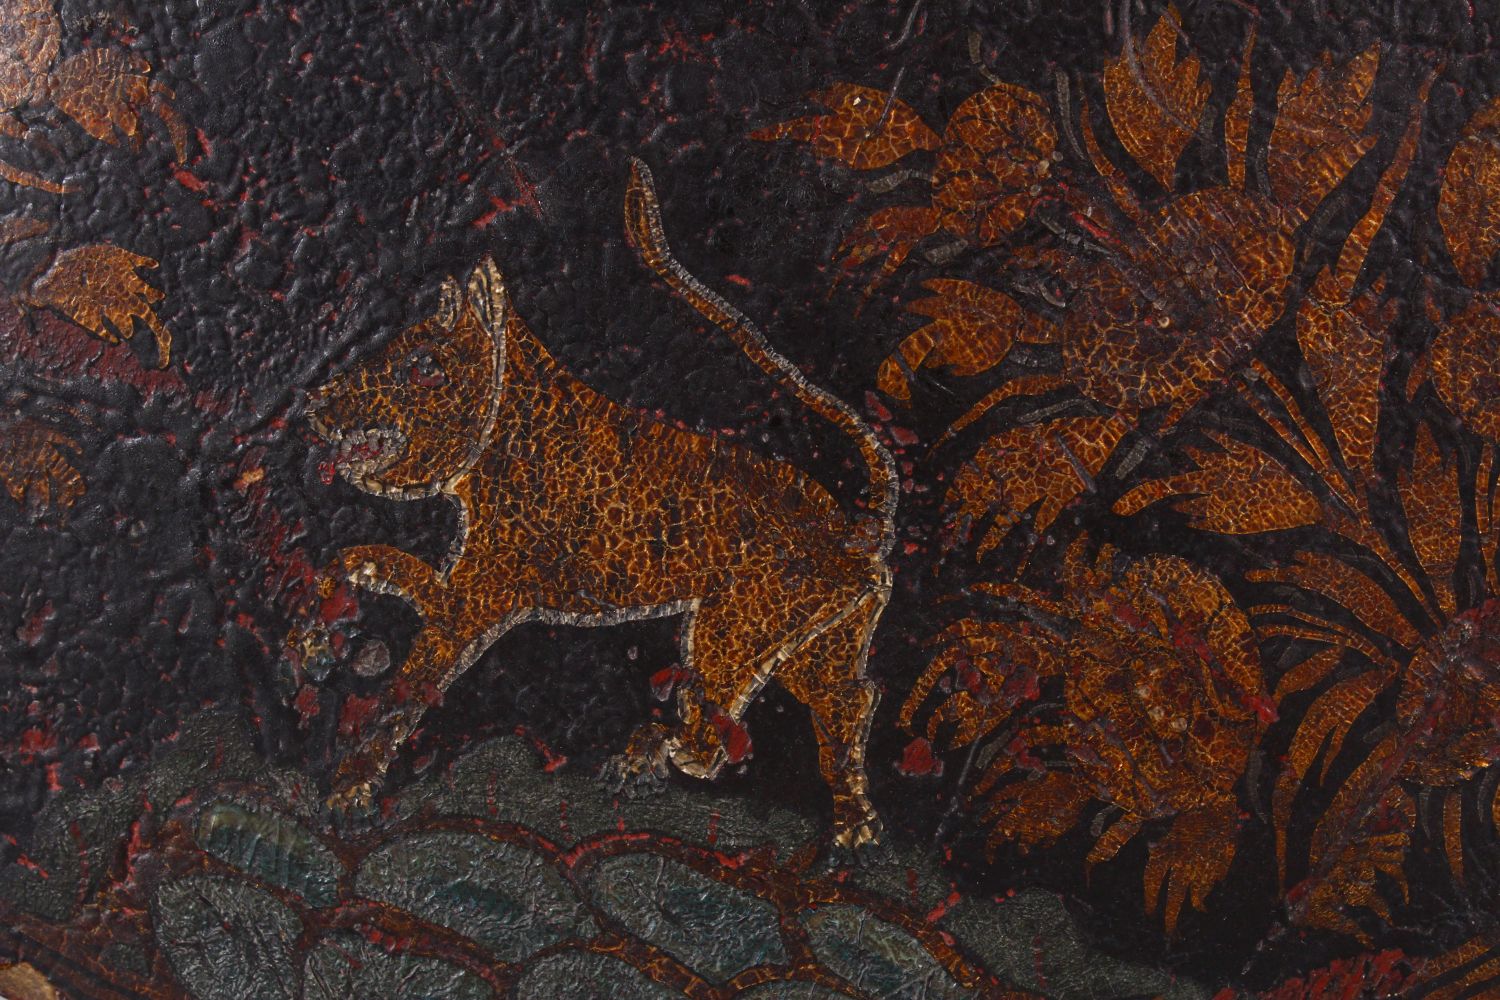 A FINE 18TH/19TH CENTURY INDIAN PAINTED LACQUER LEATHER SHIELD, decorated with a band of tigers, - Image 4 of 10